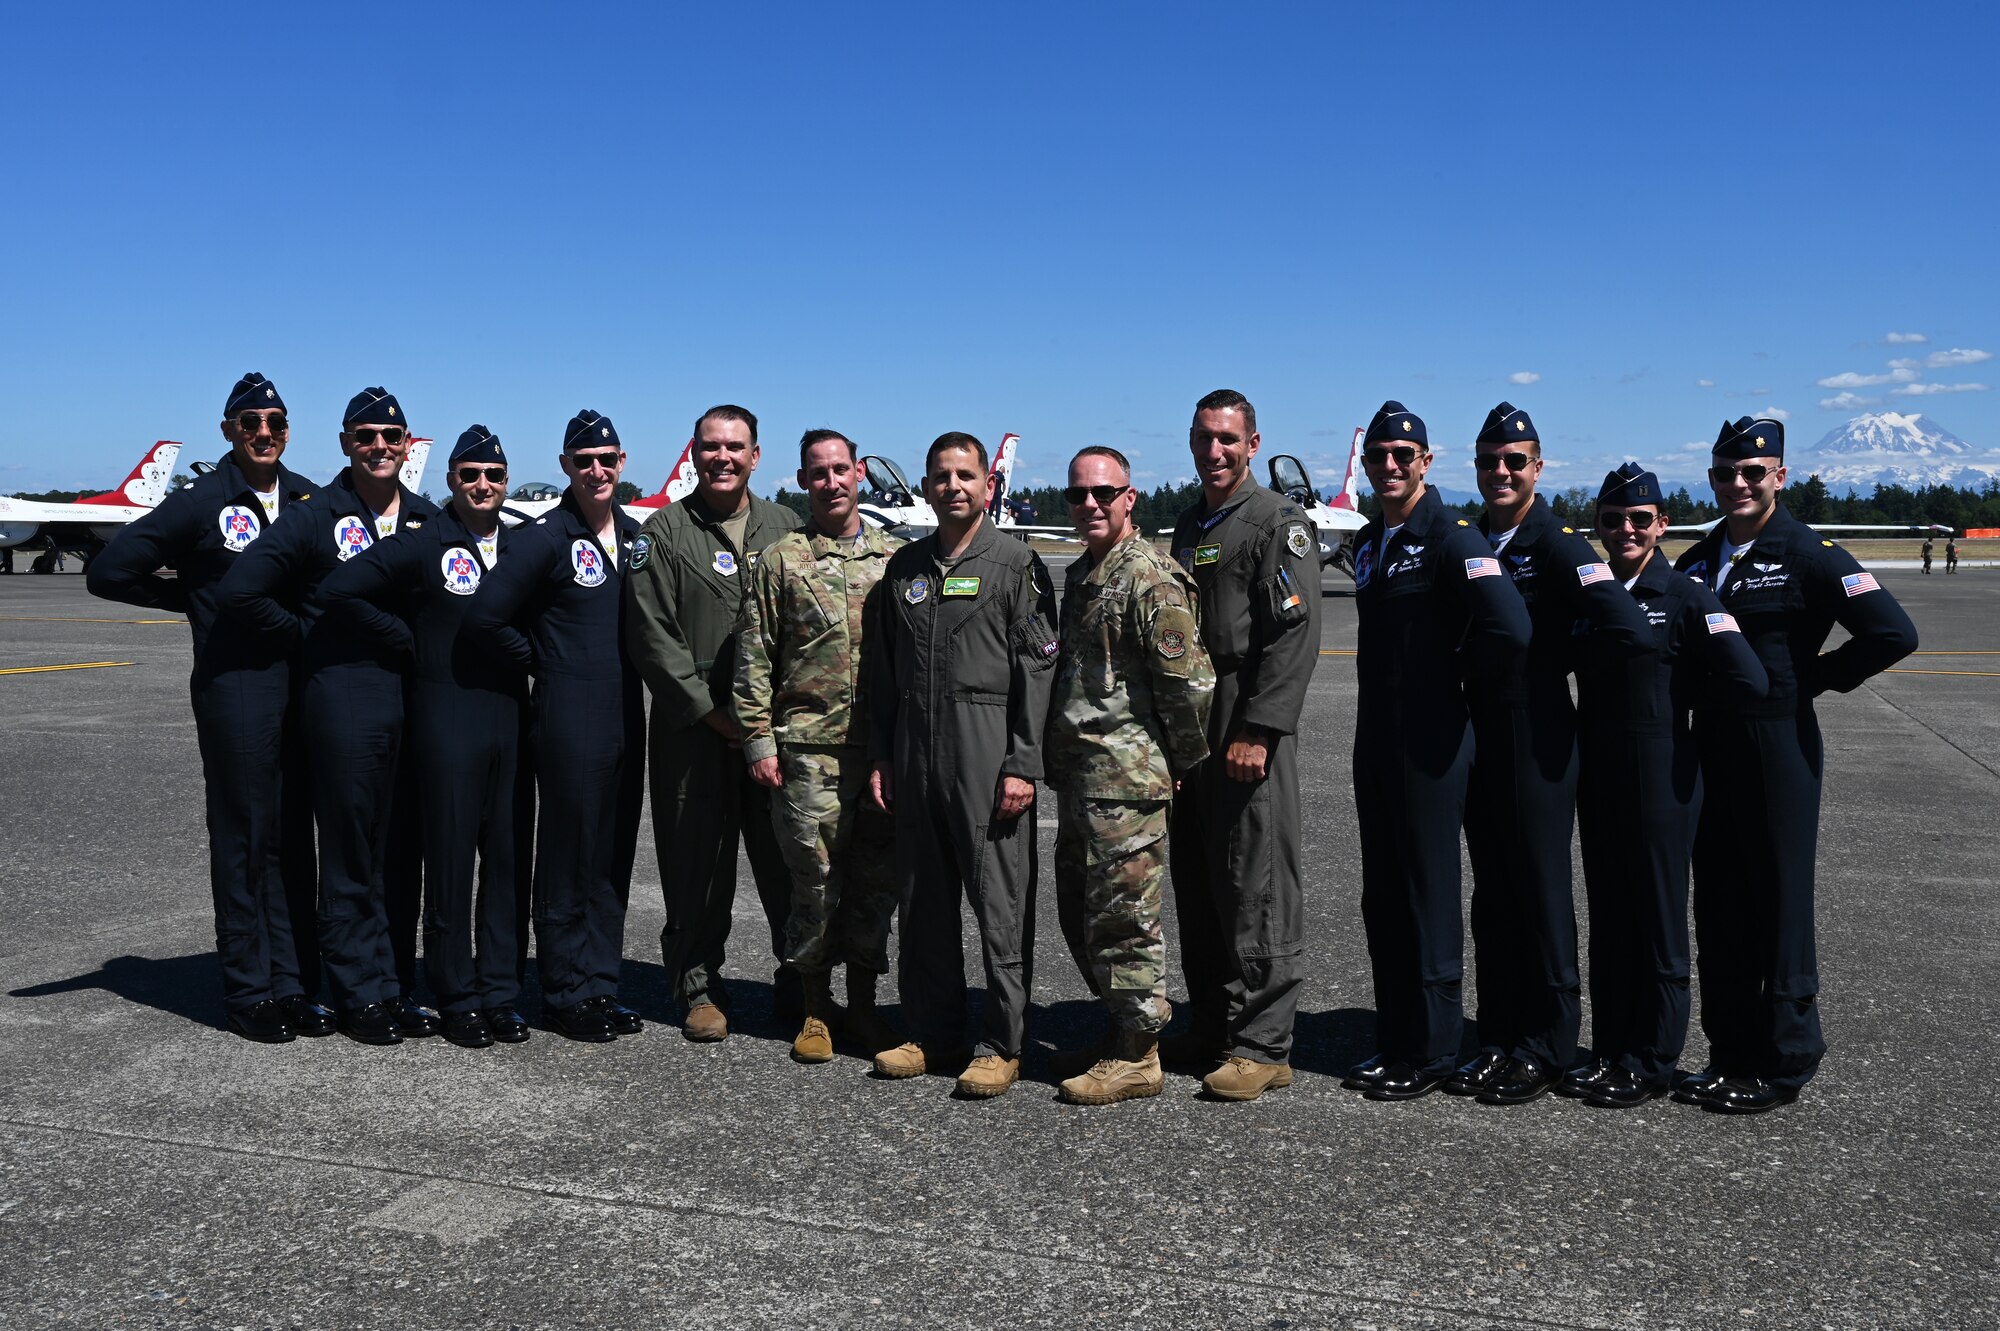 62d Airlift Wing leadership pose for a photo with the U.S. Air Force Air Demonstration Squadron “Thunderbirds” upon arrival for the Joint Base Lewis-McChord Airshow and Warrior Expo at JBLM, Washington, July 13, 2023. The mission of the JAWE is to foster goodwill to educate and familiarize attendees with the people, mission, and equipment of the Air Force, Army, and other Armed Services while continuing to provide installation-wide mission support. The Thunderbirds are one of the JAWE’s premier acts and will be joined by aerial demonstrations from the C-17 West Coast Demonstration Team, Tora! Tora! Tora! and many more. (U.S. Air Force photo by Senior Airman Colleen Anthony)